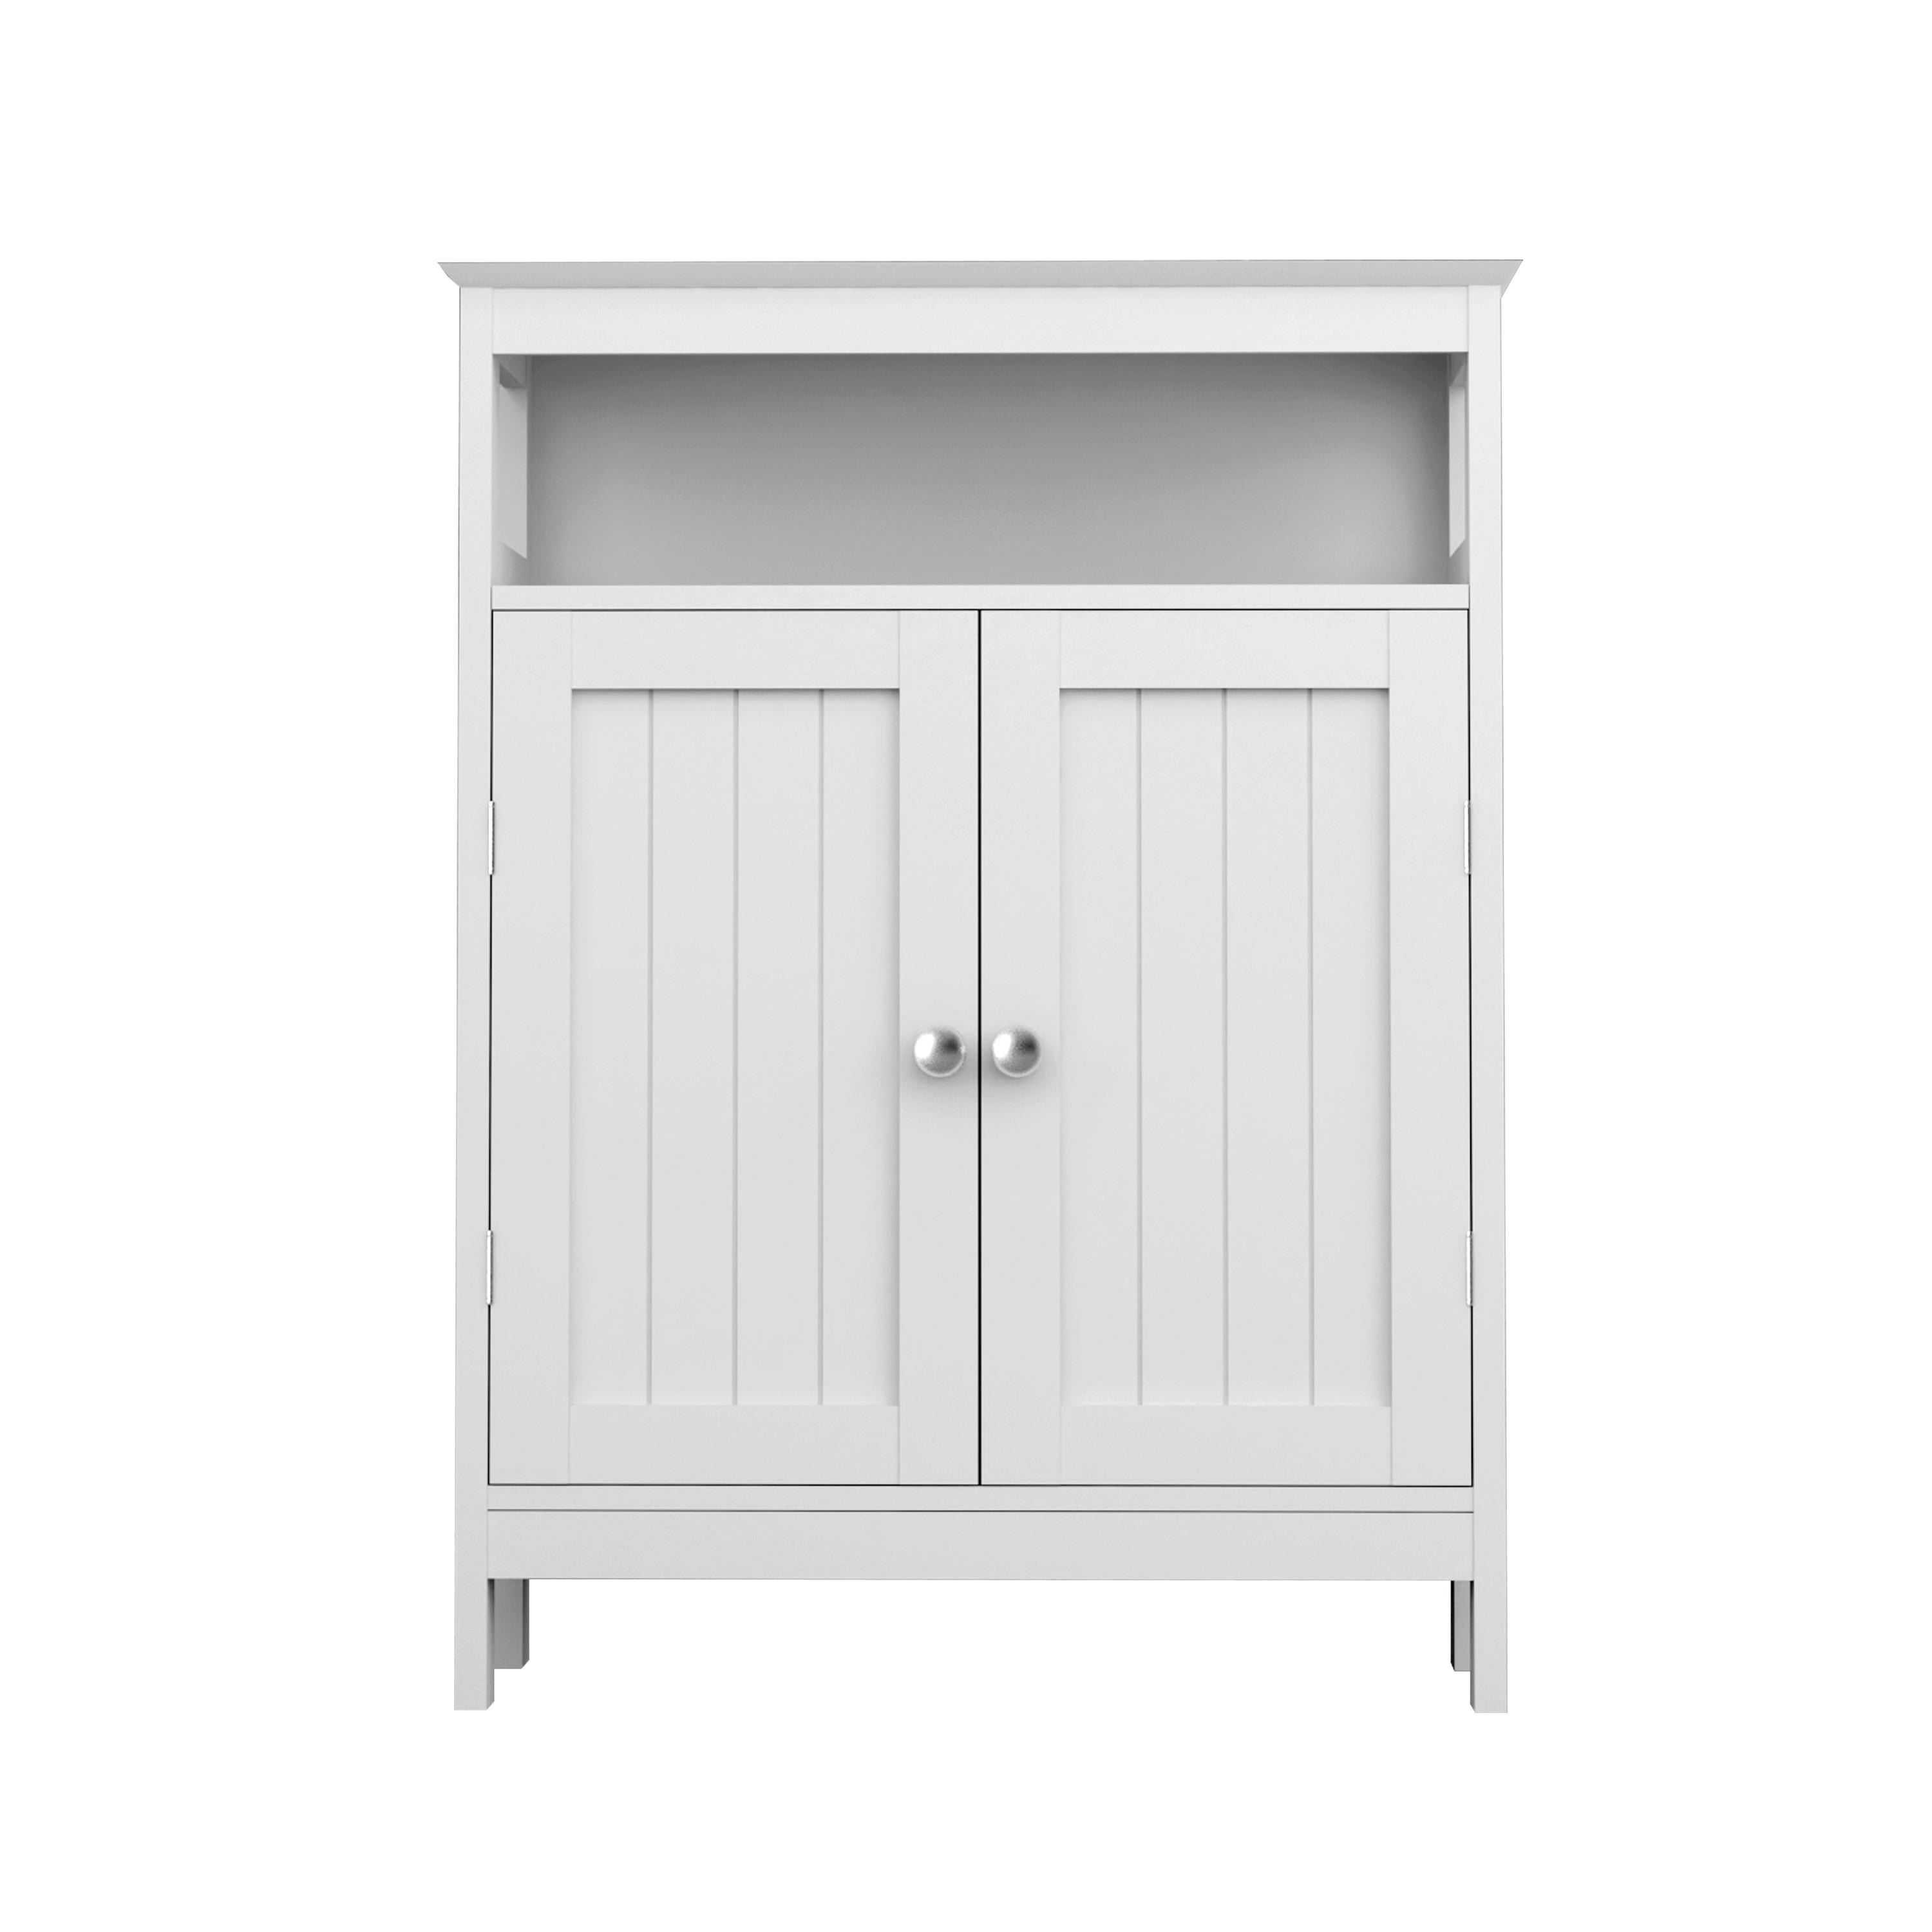 https://ak1.ostkcdn.com/images/products/is/images/direct/9382de1a0028234ce8adedde8f431874a5020d2f/Bathroom-standing-storage-cabinet.jpg